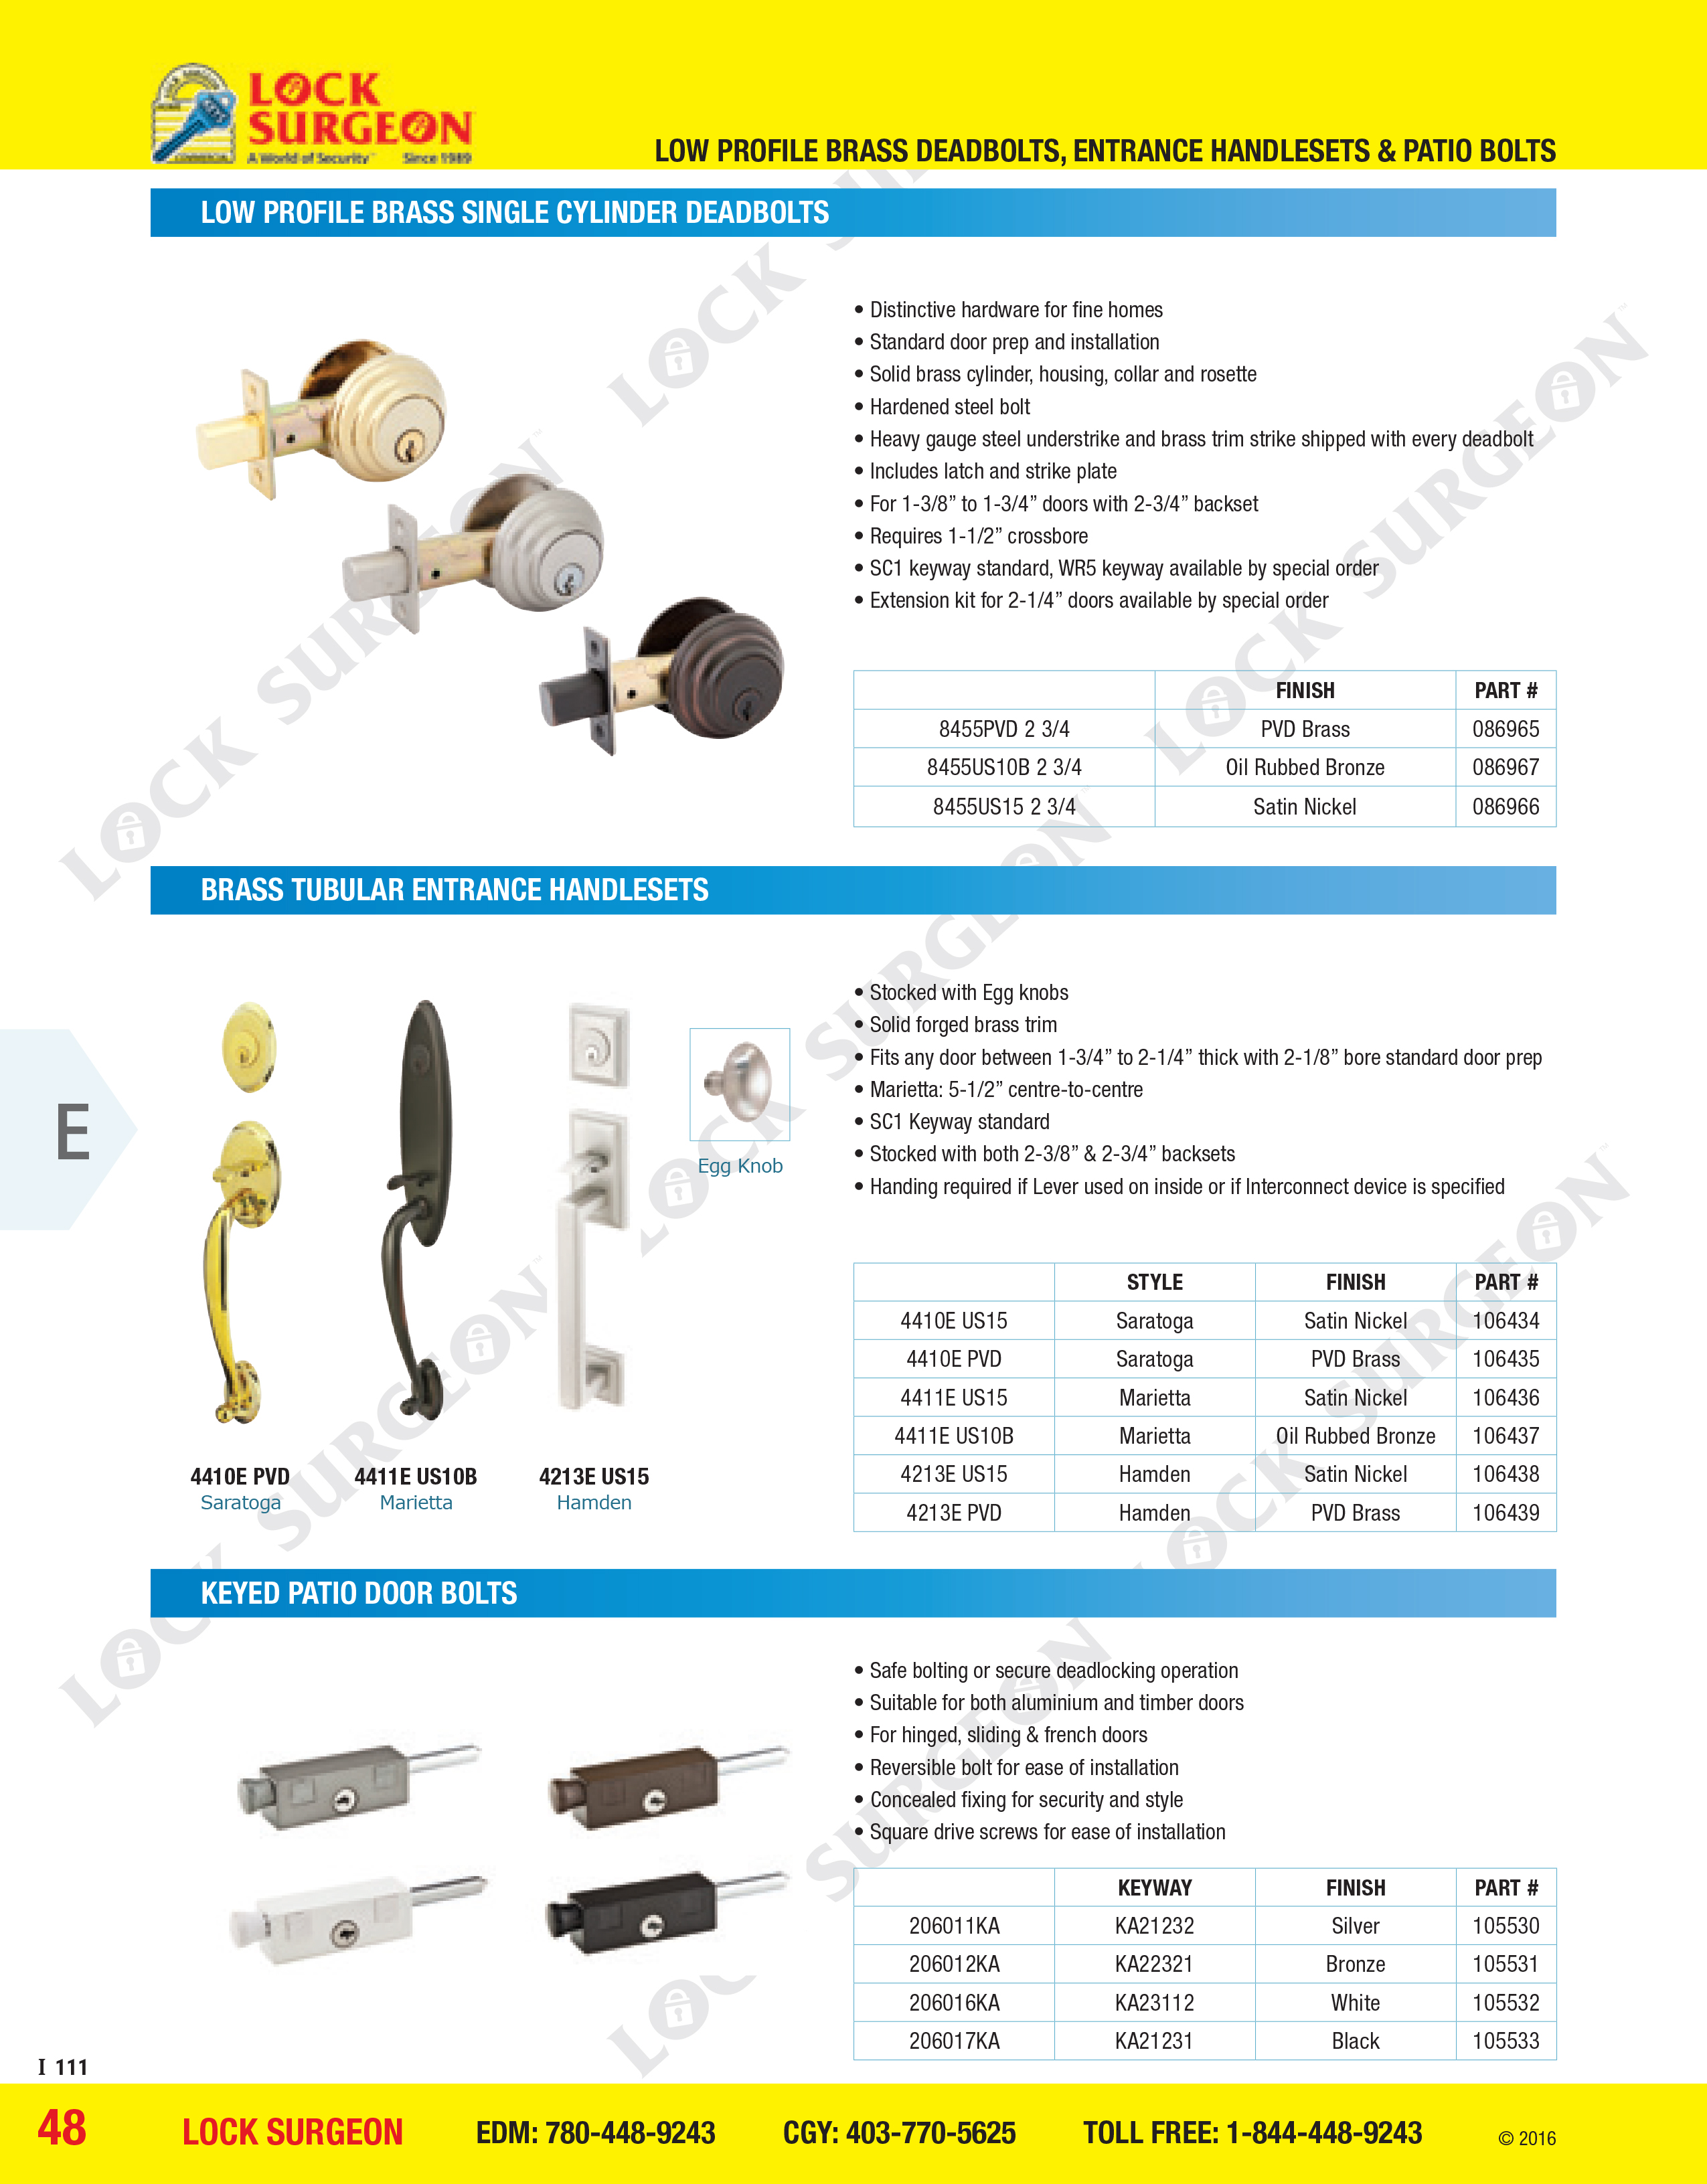 Schlage deadbolts & handles secondary locking Patio pins to lock down patio doors